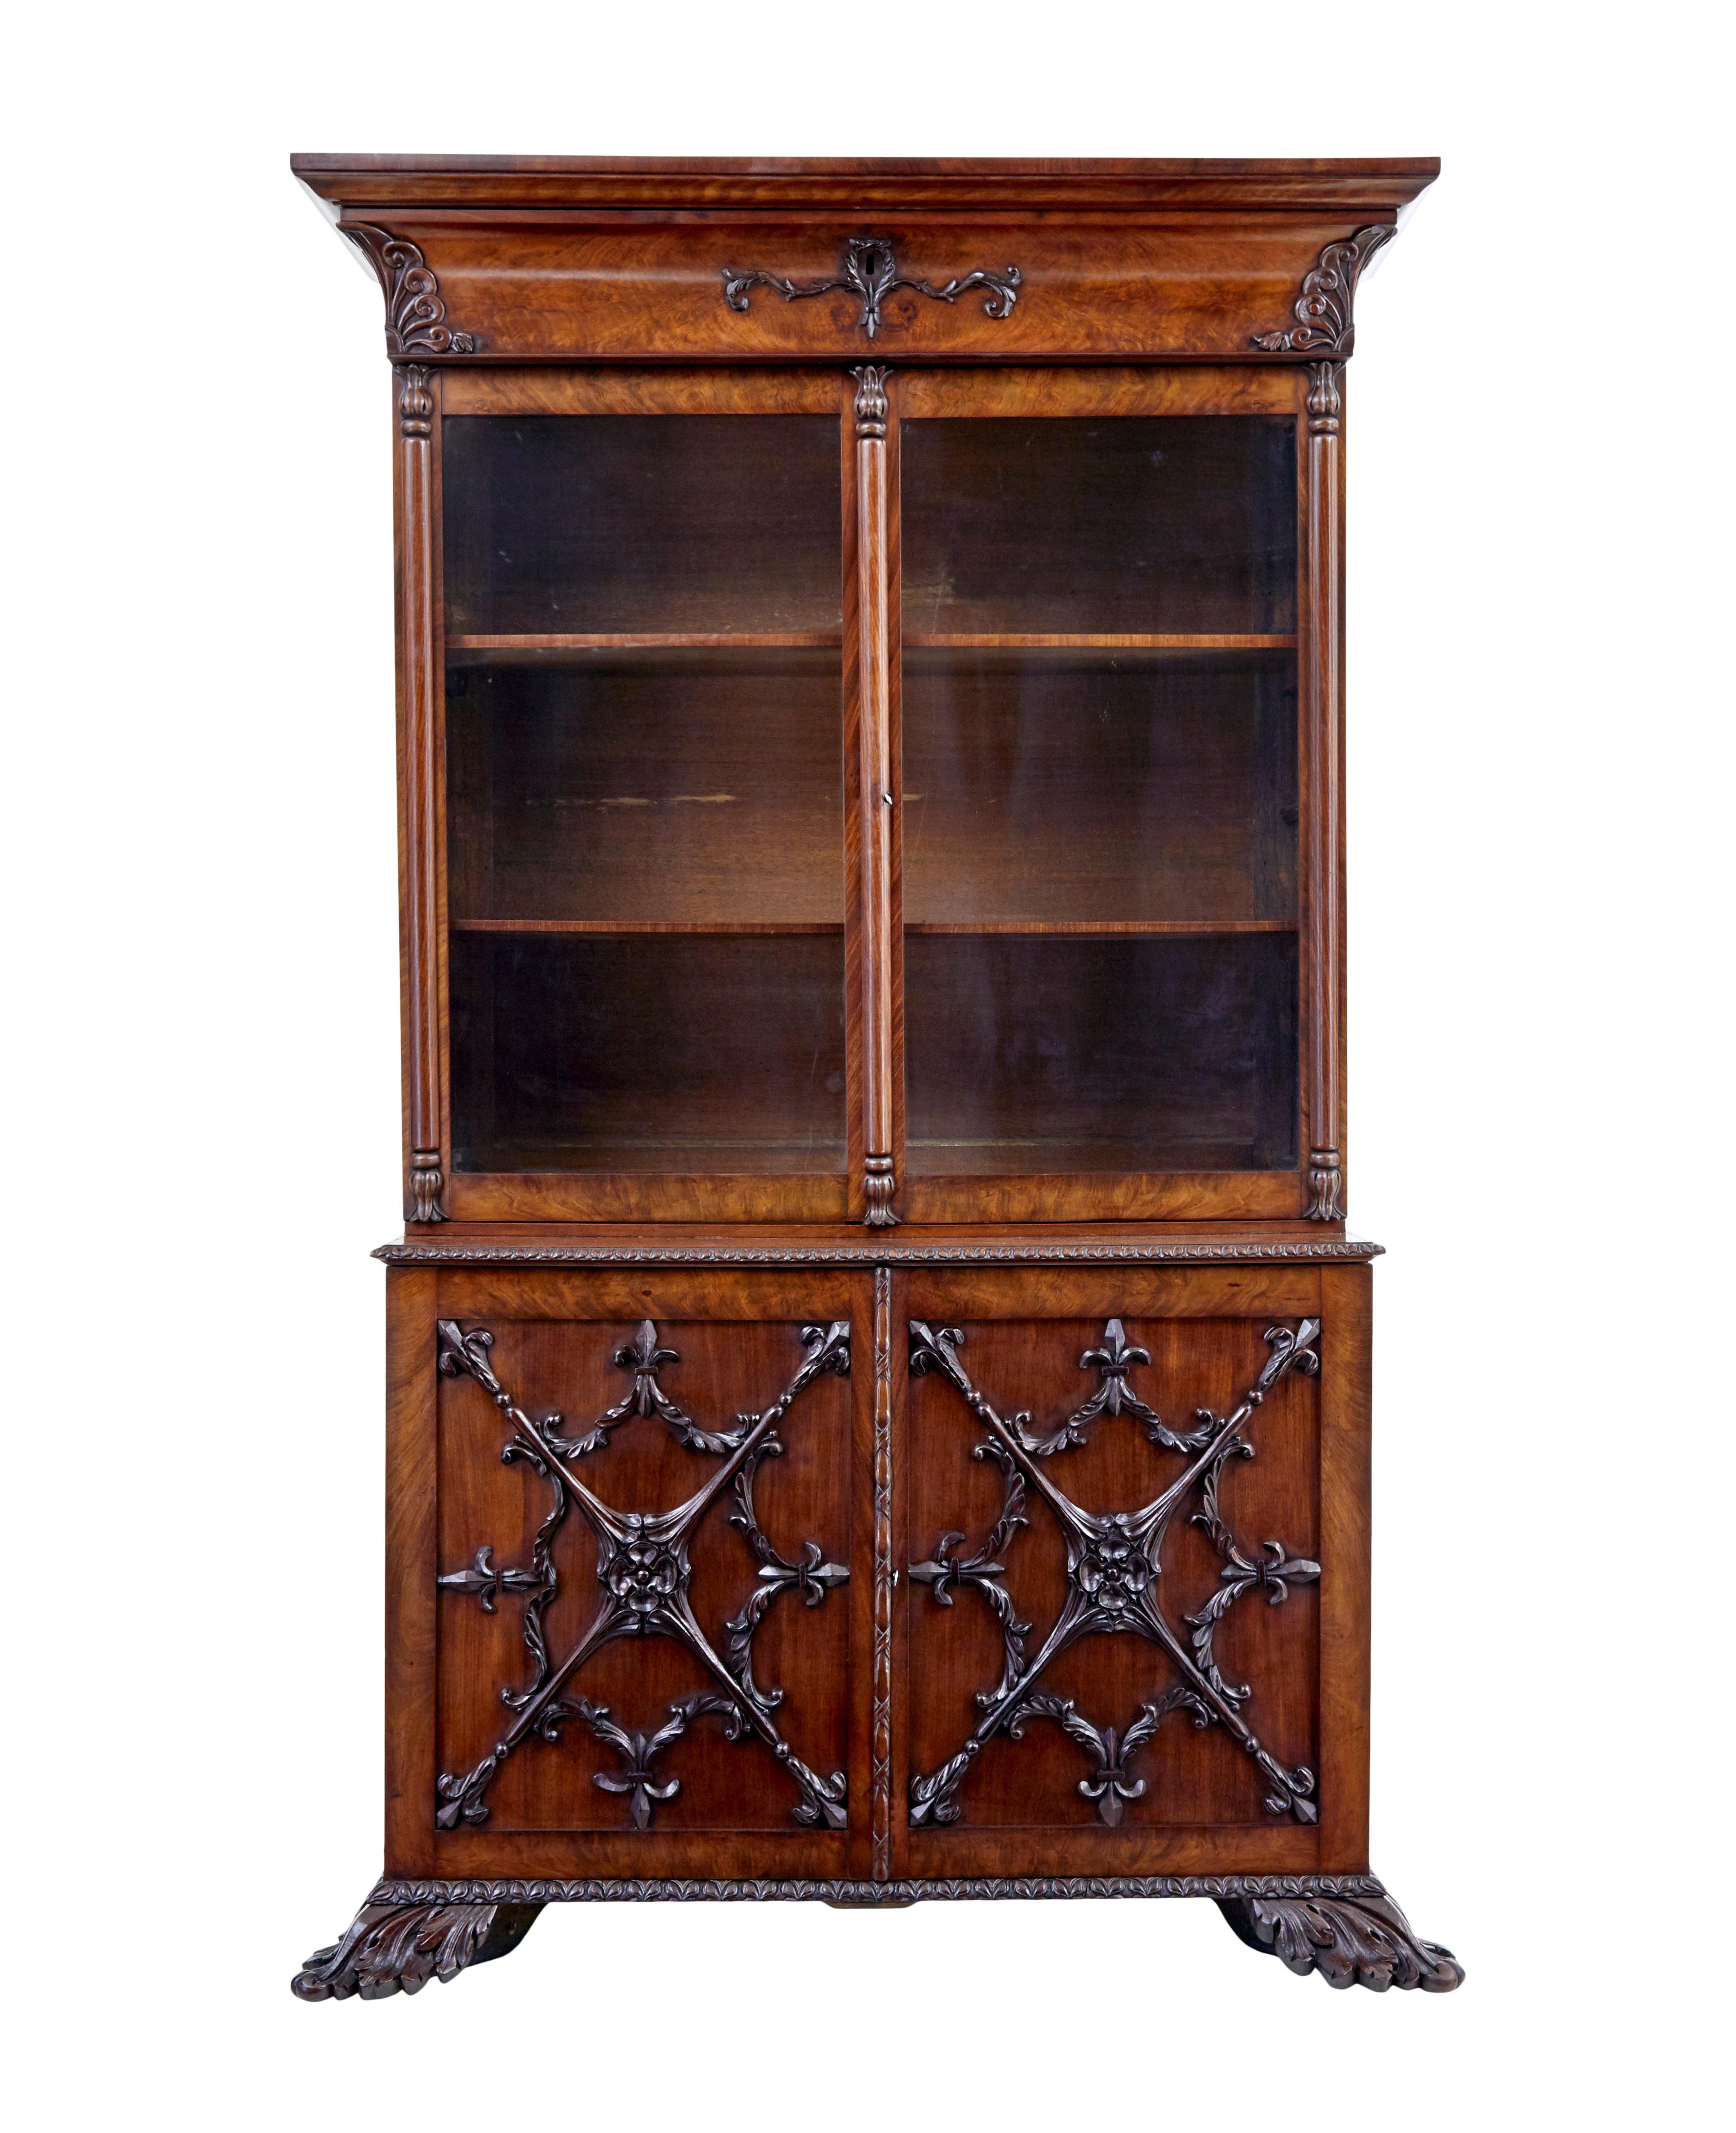 Rare danish carved mahogany bookcase circa 1840.

2 part bookcase.  Top section with hidden drawer below the cornice.  Applied carving to corners and around the key hole.  Double glazed doors open to 2 shelves with fixed height brackets for a